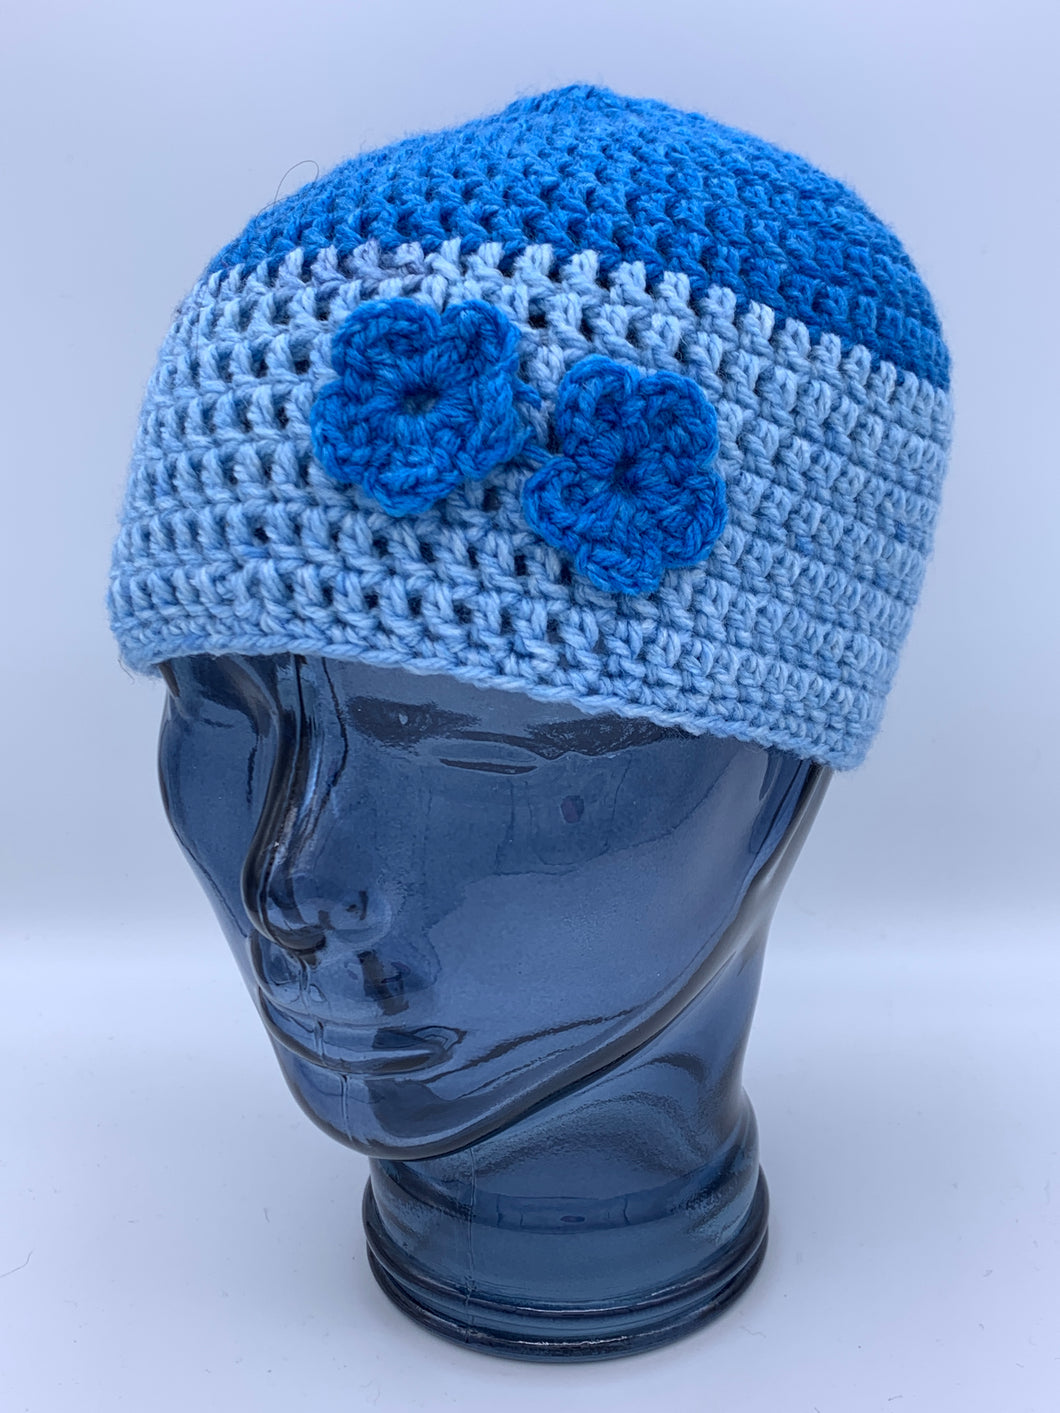 Crochet two-tone blue beanie hat with flower detail - Size Teen/small adult